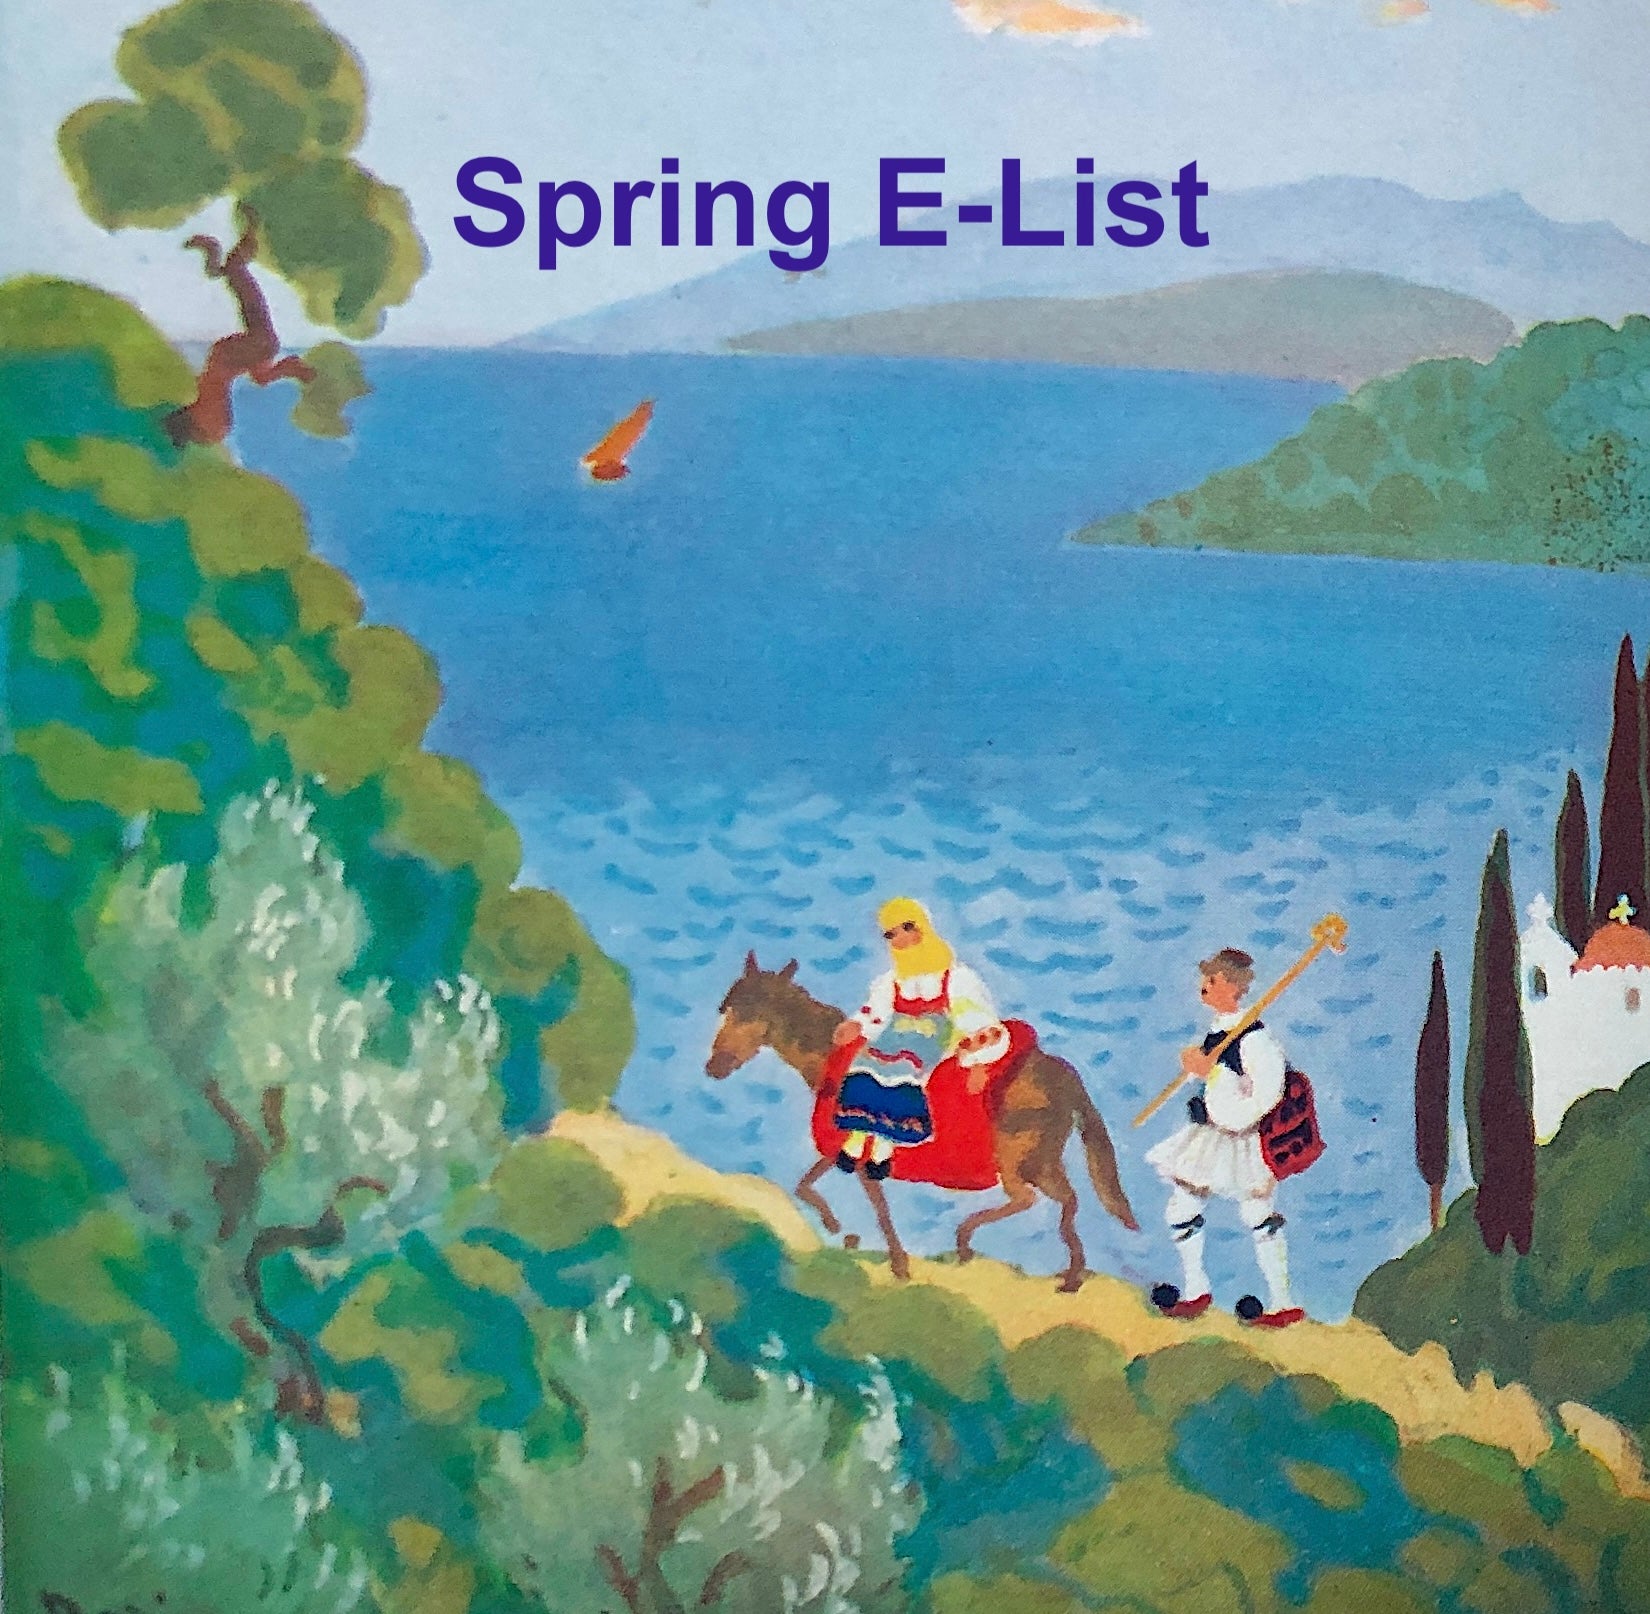 Early Spring Special Items List